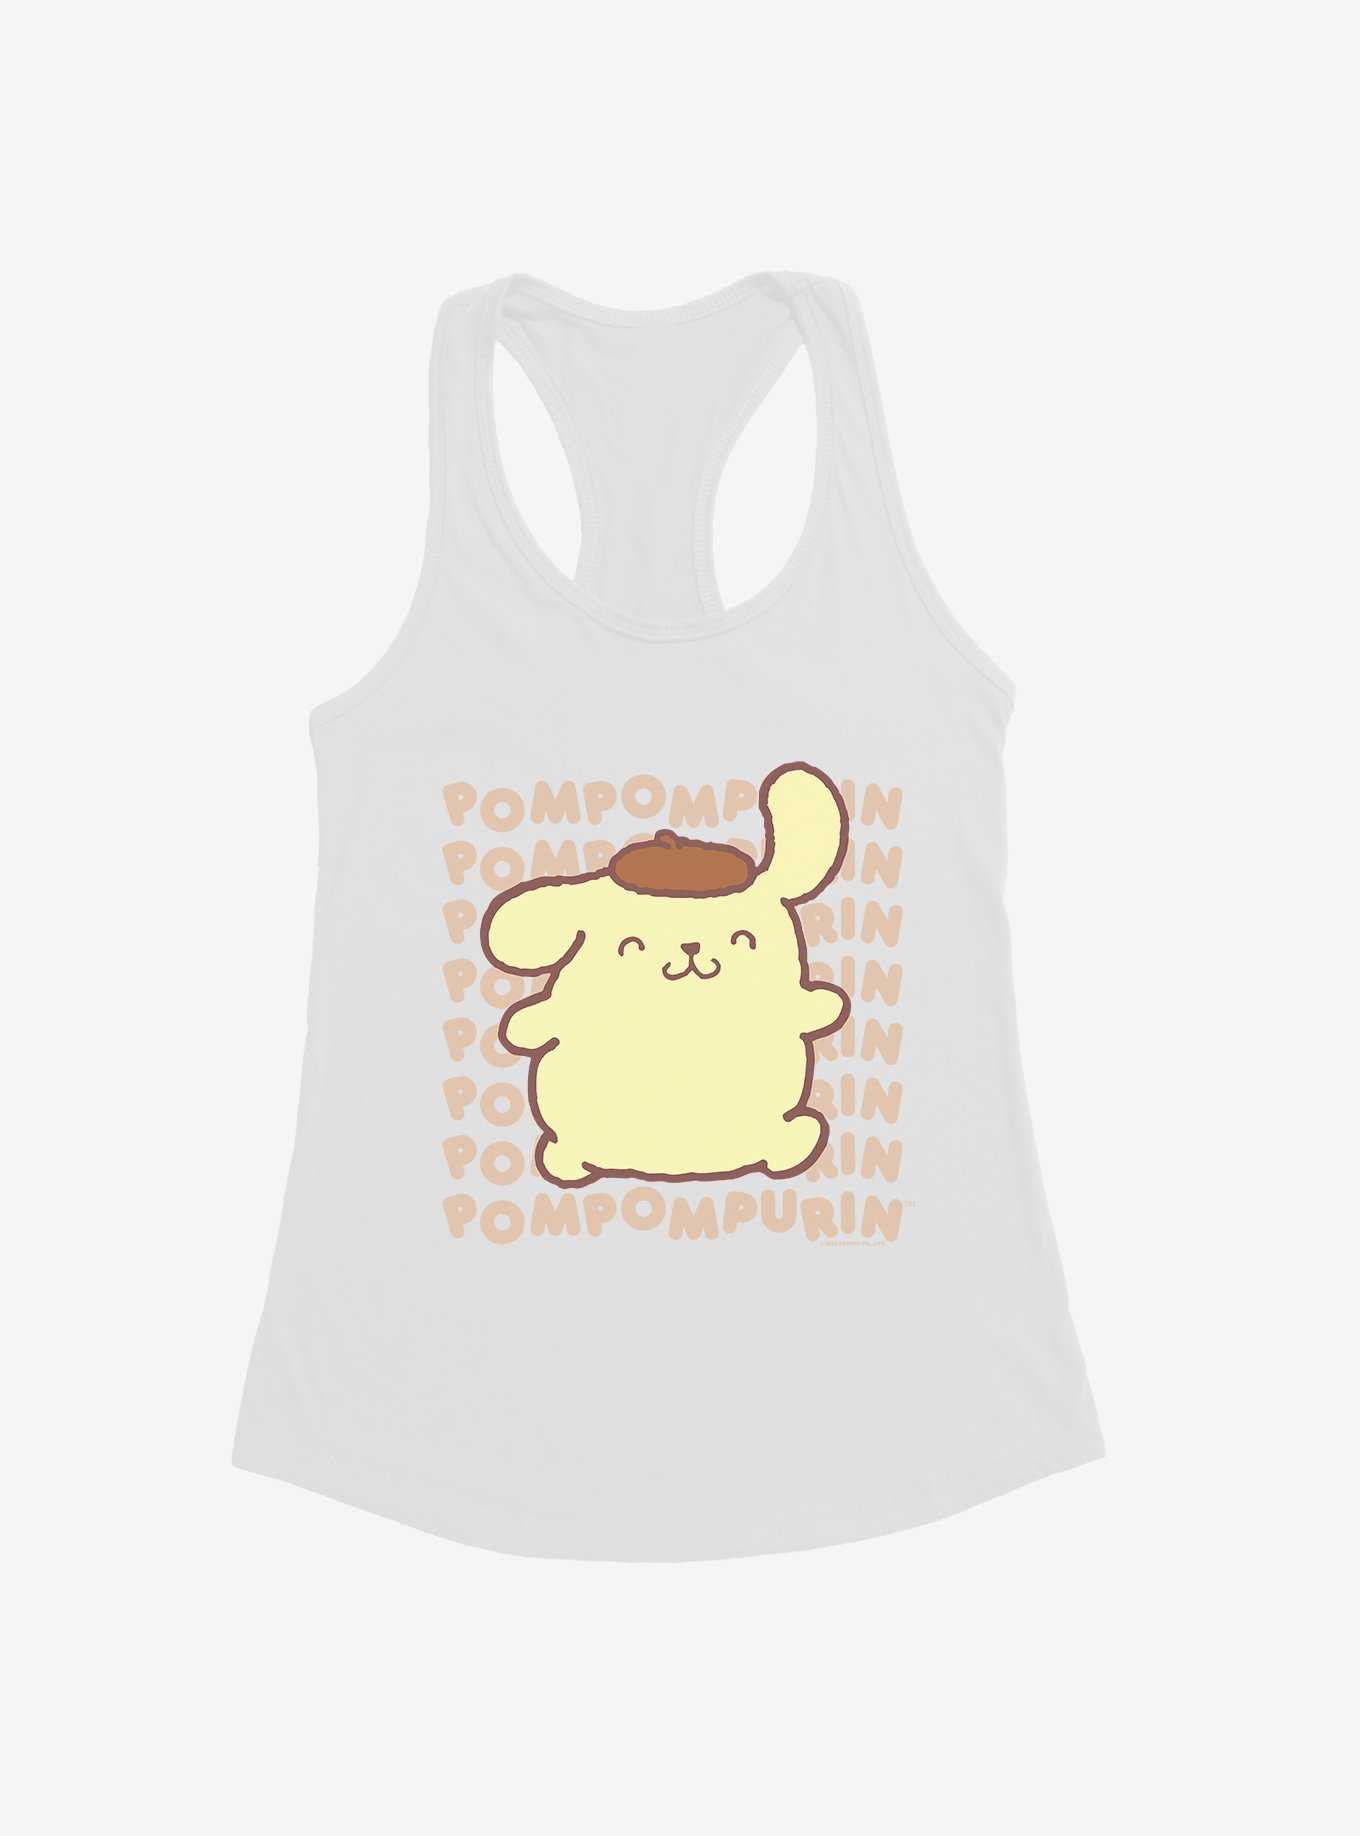 Pompompurin Character Name  Womens Tank Top, , hi-res